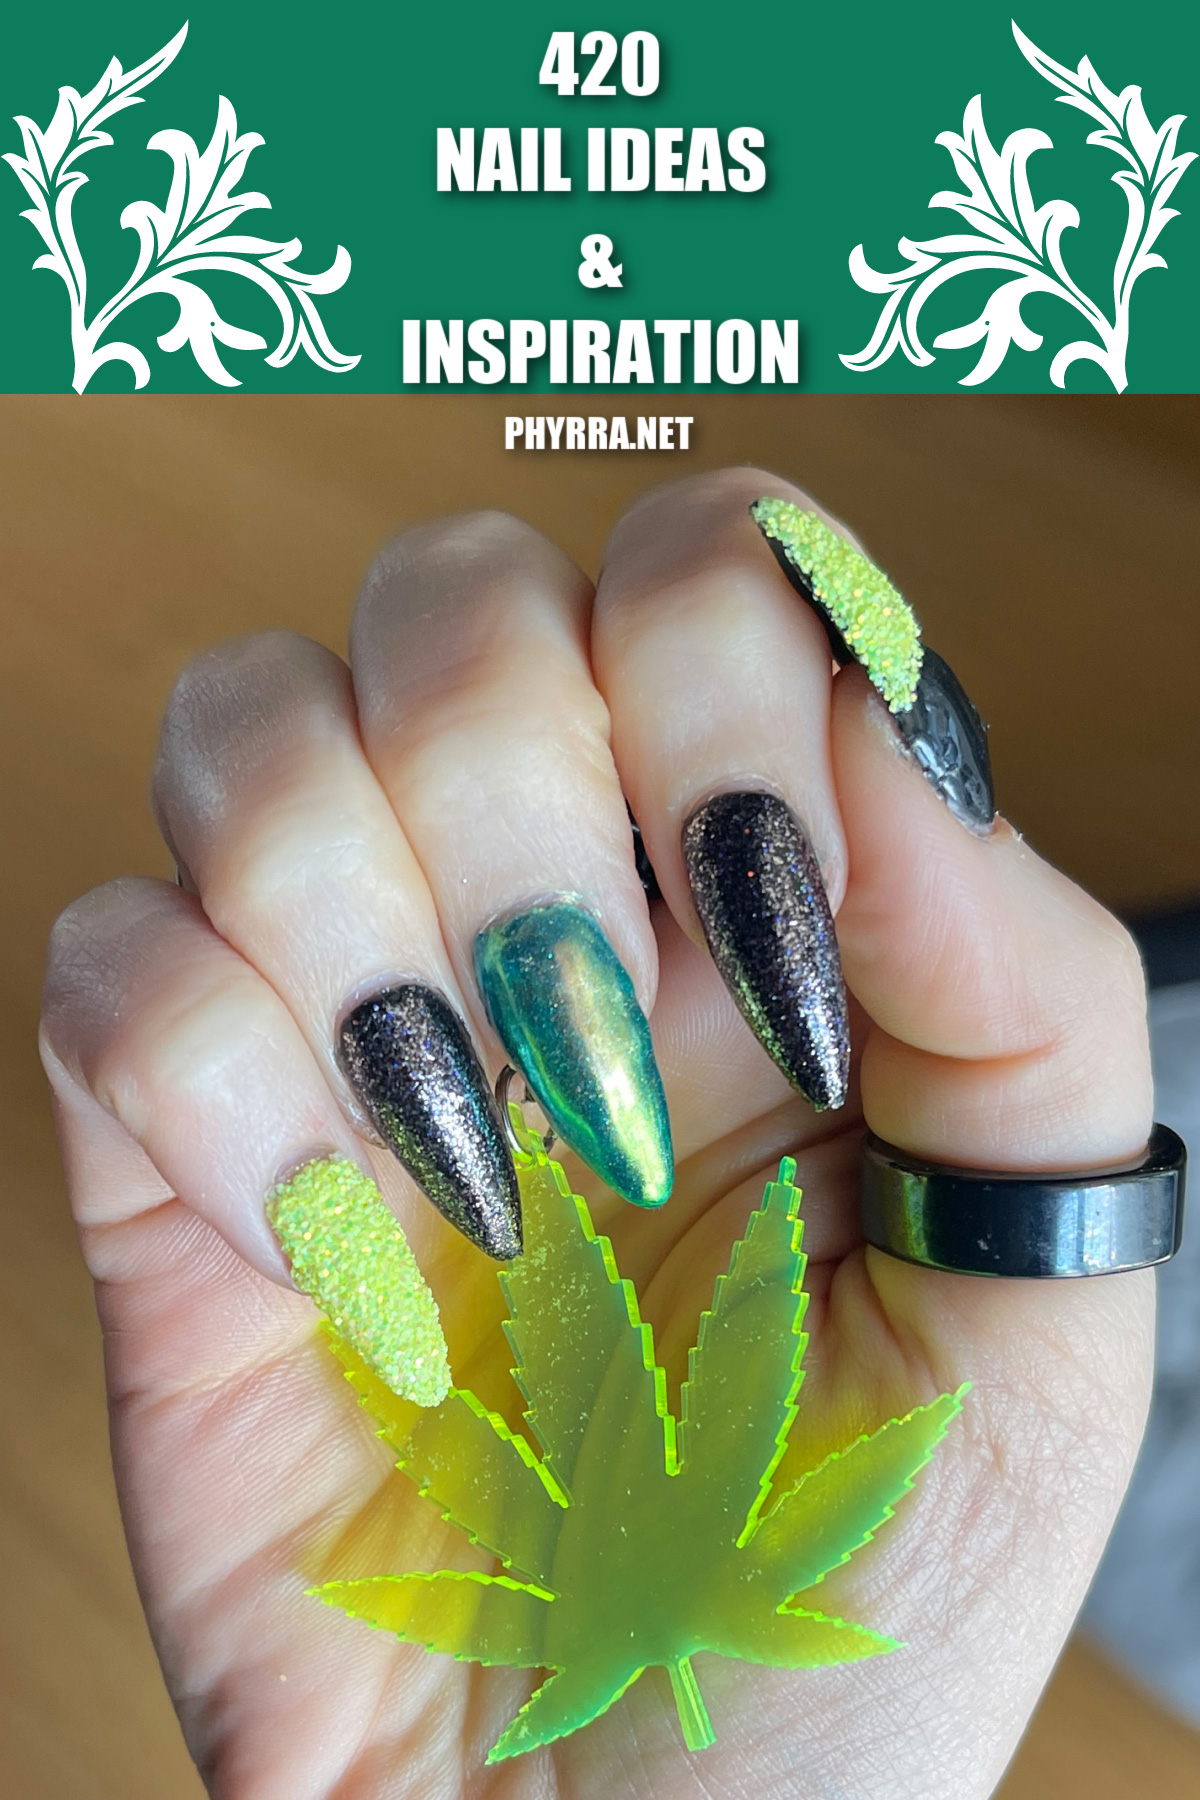 15 420 Nail Ideas and Inspiration